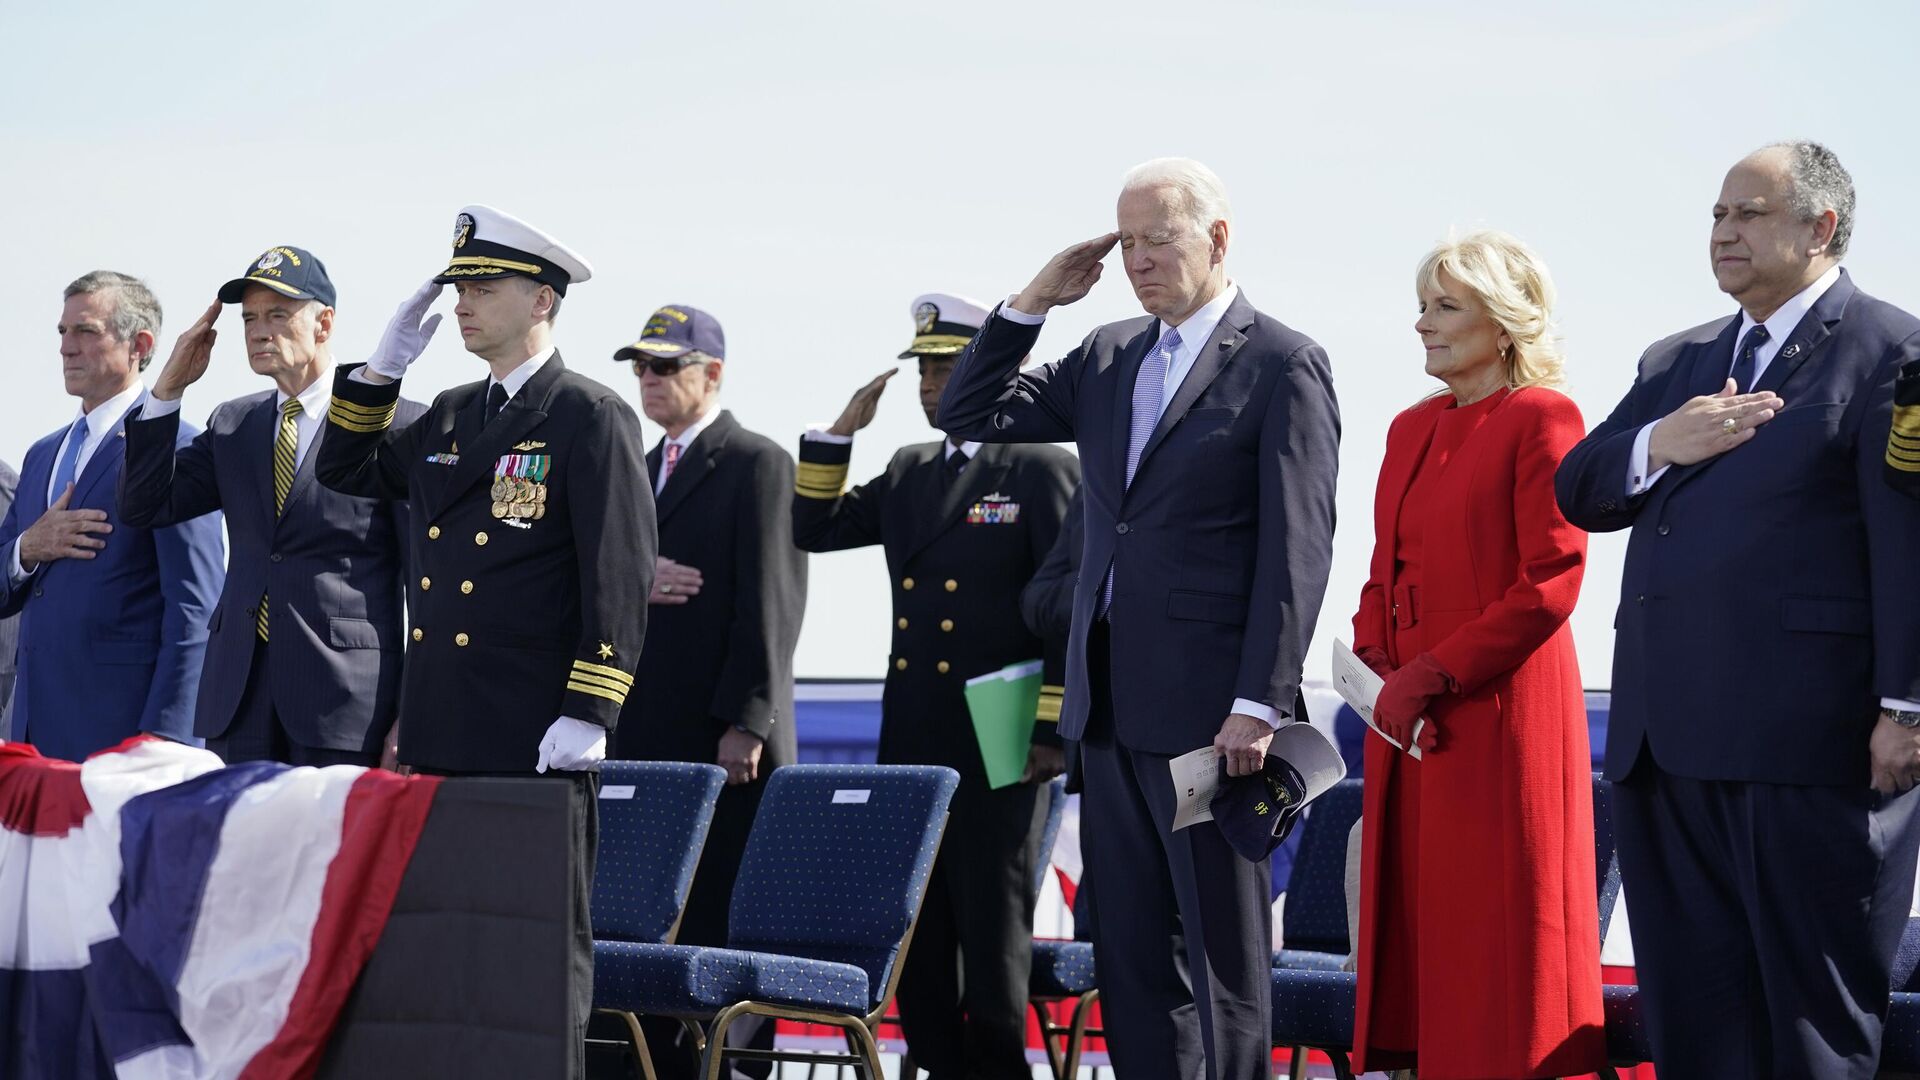 President Joe Biden, first lady Jill Biden and United States Secretary of the Navy Carlos Del Toro, stand during a 21-cannon salute at a commissioning ceremony for USS Delaware, Virginia-class fast-attack submarine, at the Port of Wilmington in Wilmington, Del., Saturday, April 2, 2022.  - Sputnik International, 1920, 02.04.2022